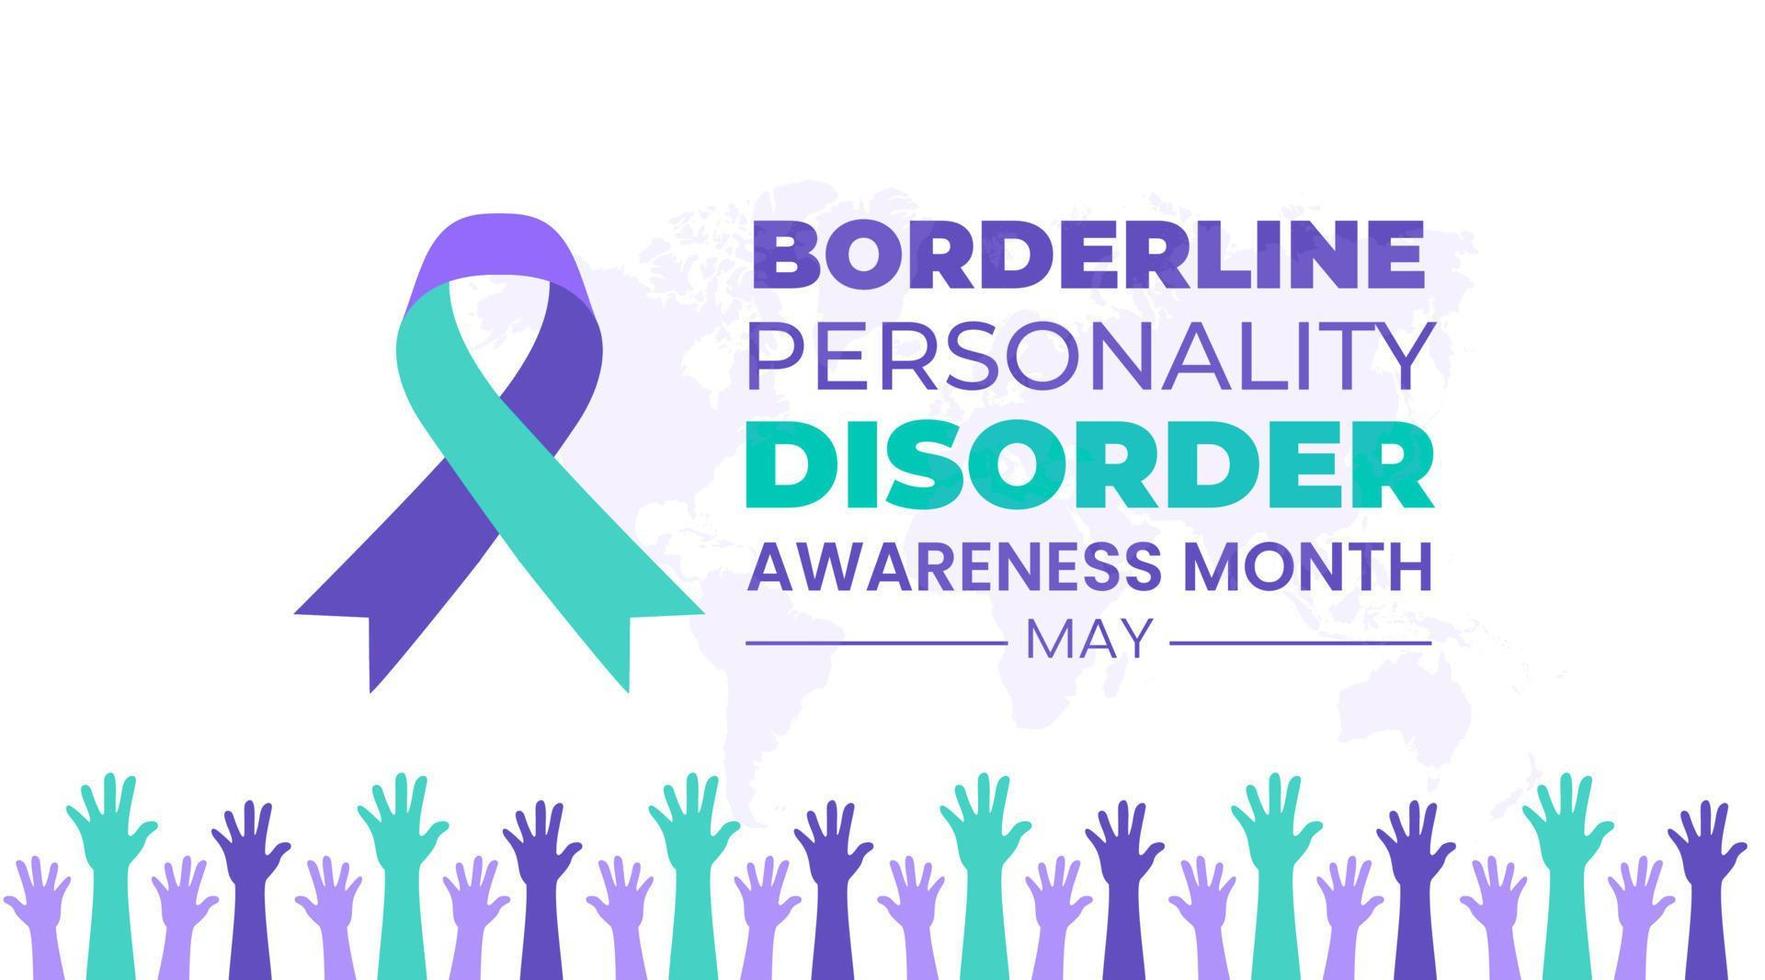 Borderline Personality Disorder Awareness Month background or banner design template celebrate in may vector